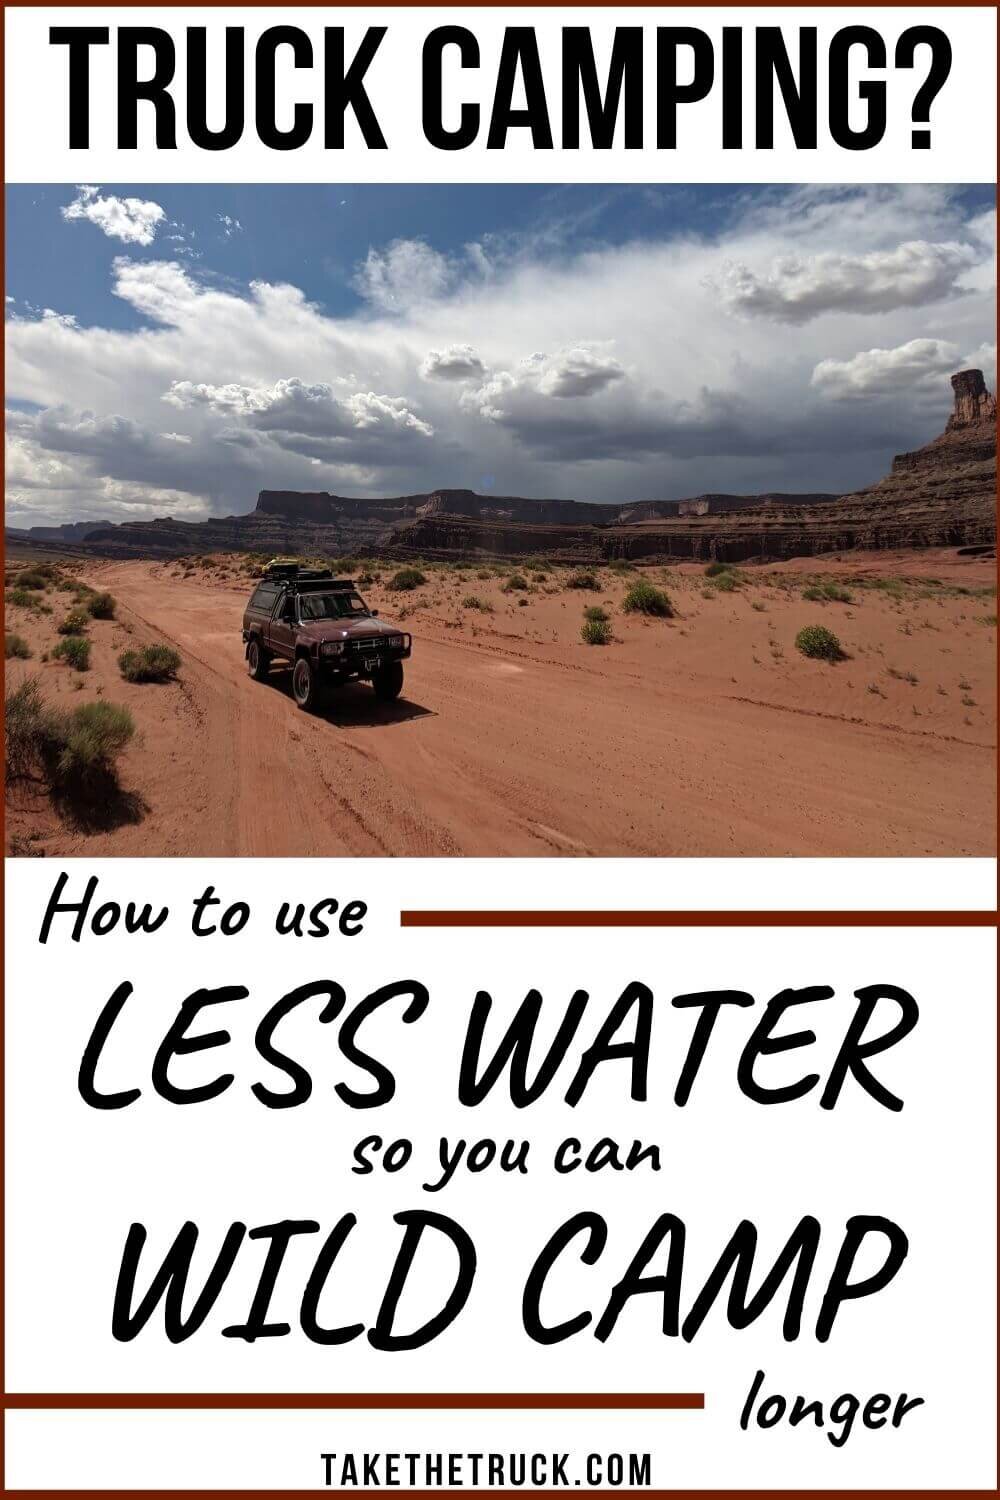 This post is all about wild camping hacks and boondocking tips about conserving water when camping with no hookups. Special tips for saving water when tent, car or truck camping with minimal water.